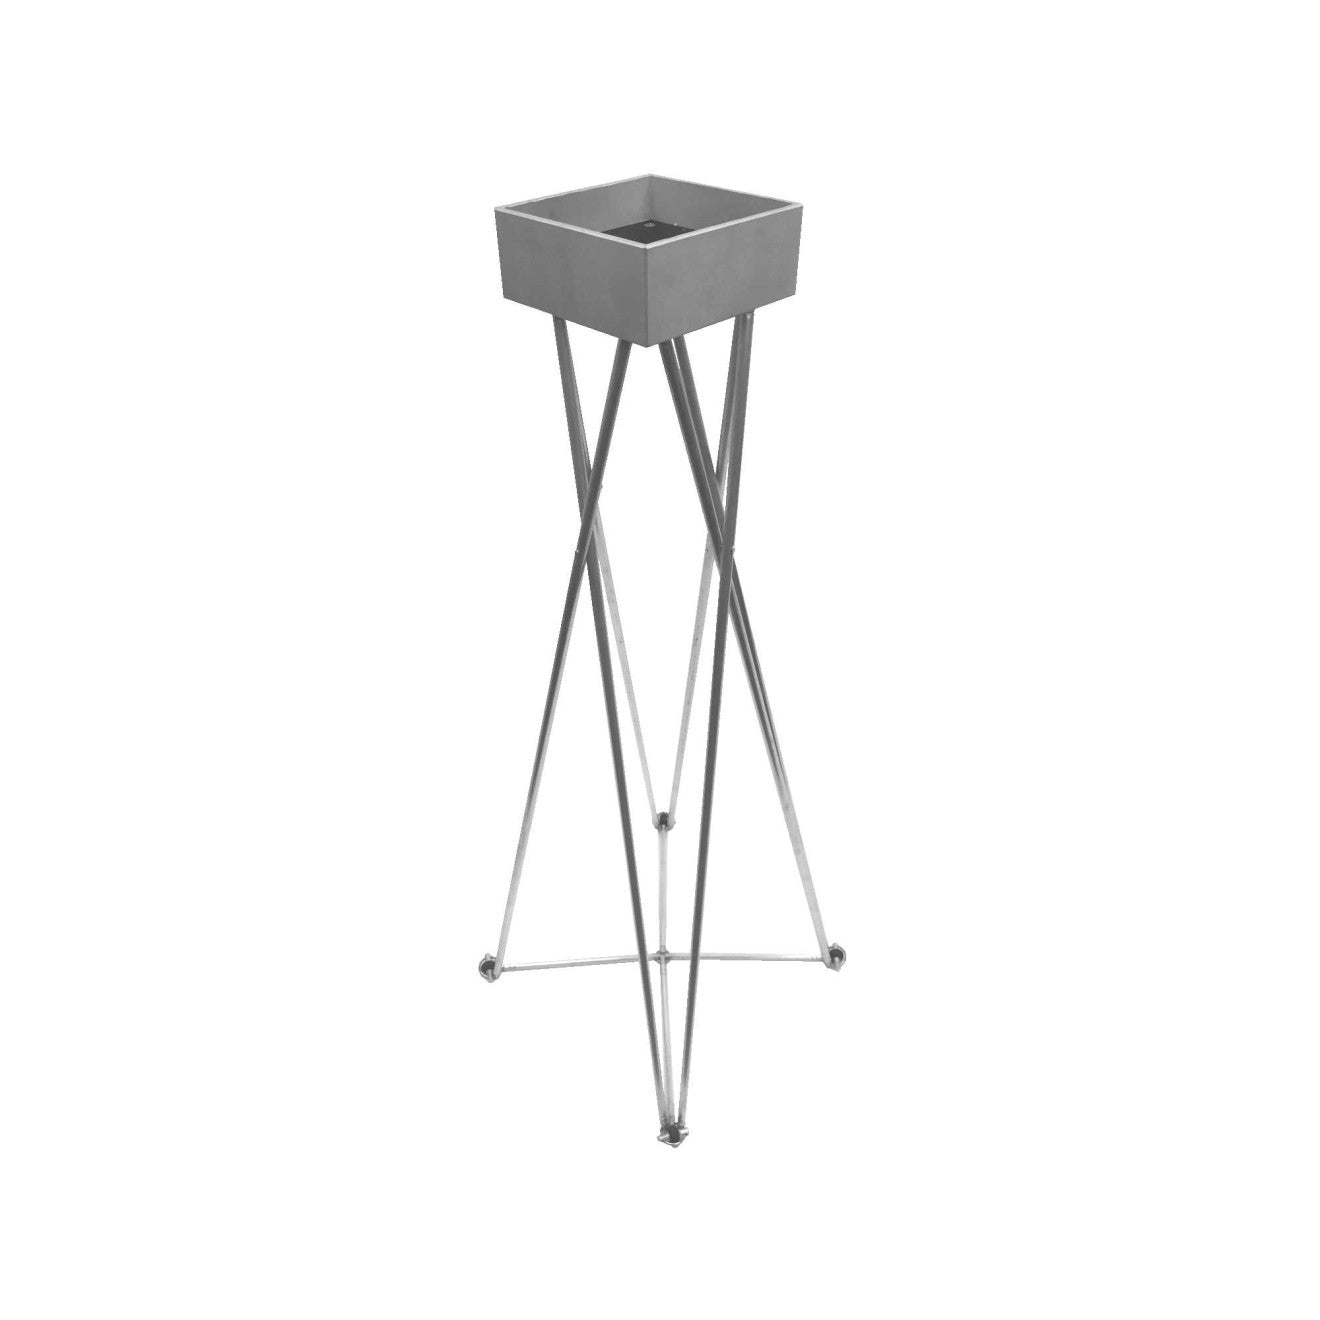 Spider stand with aluminum box